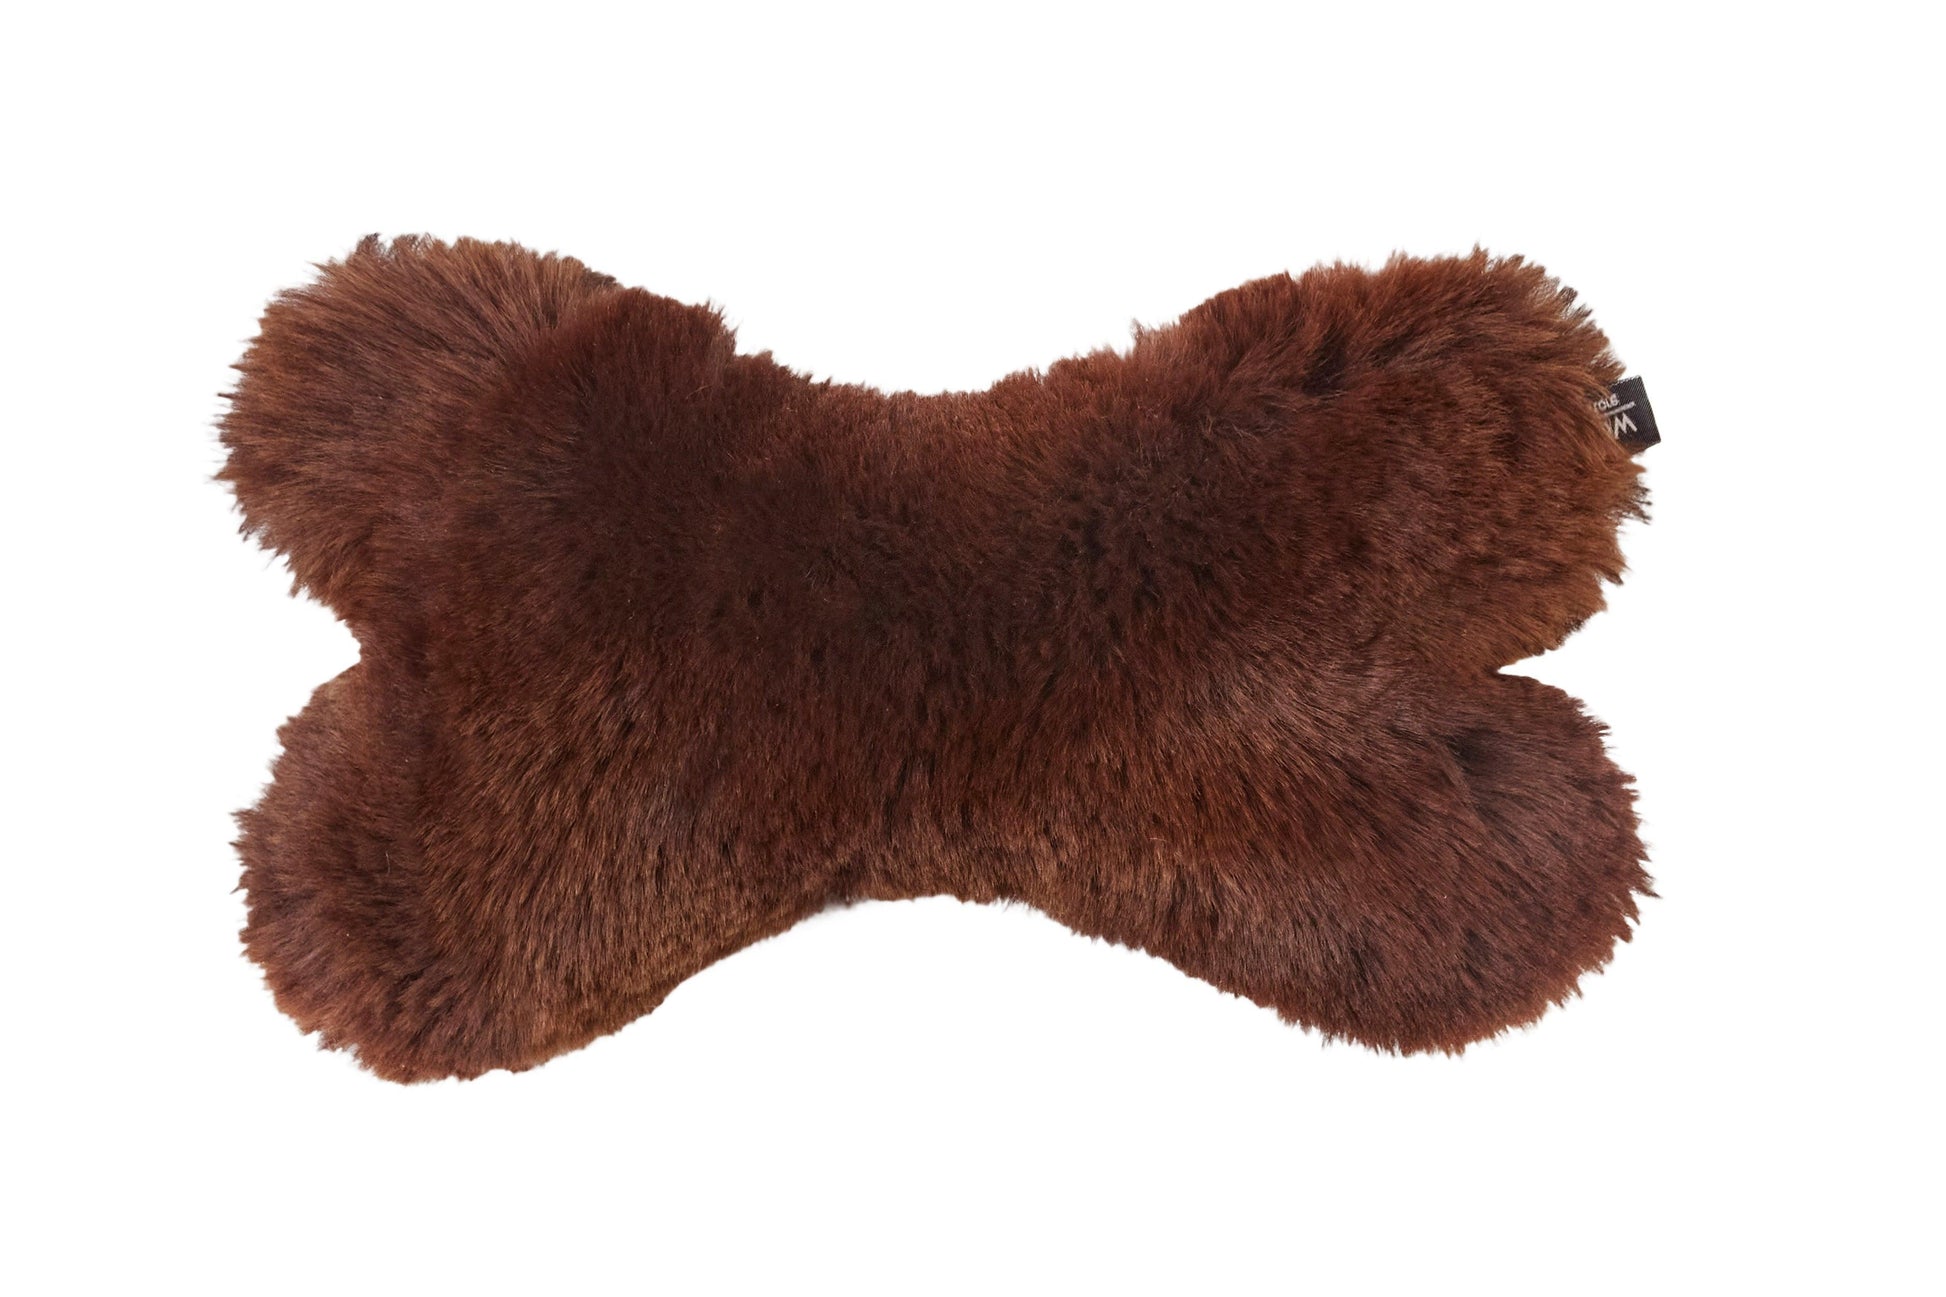 A brown furry Natural Sheepskin Dog Toy Bone made with natural materials by Mellow Pet Store.